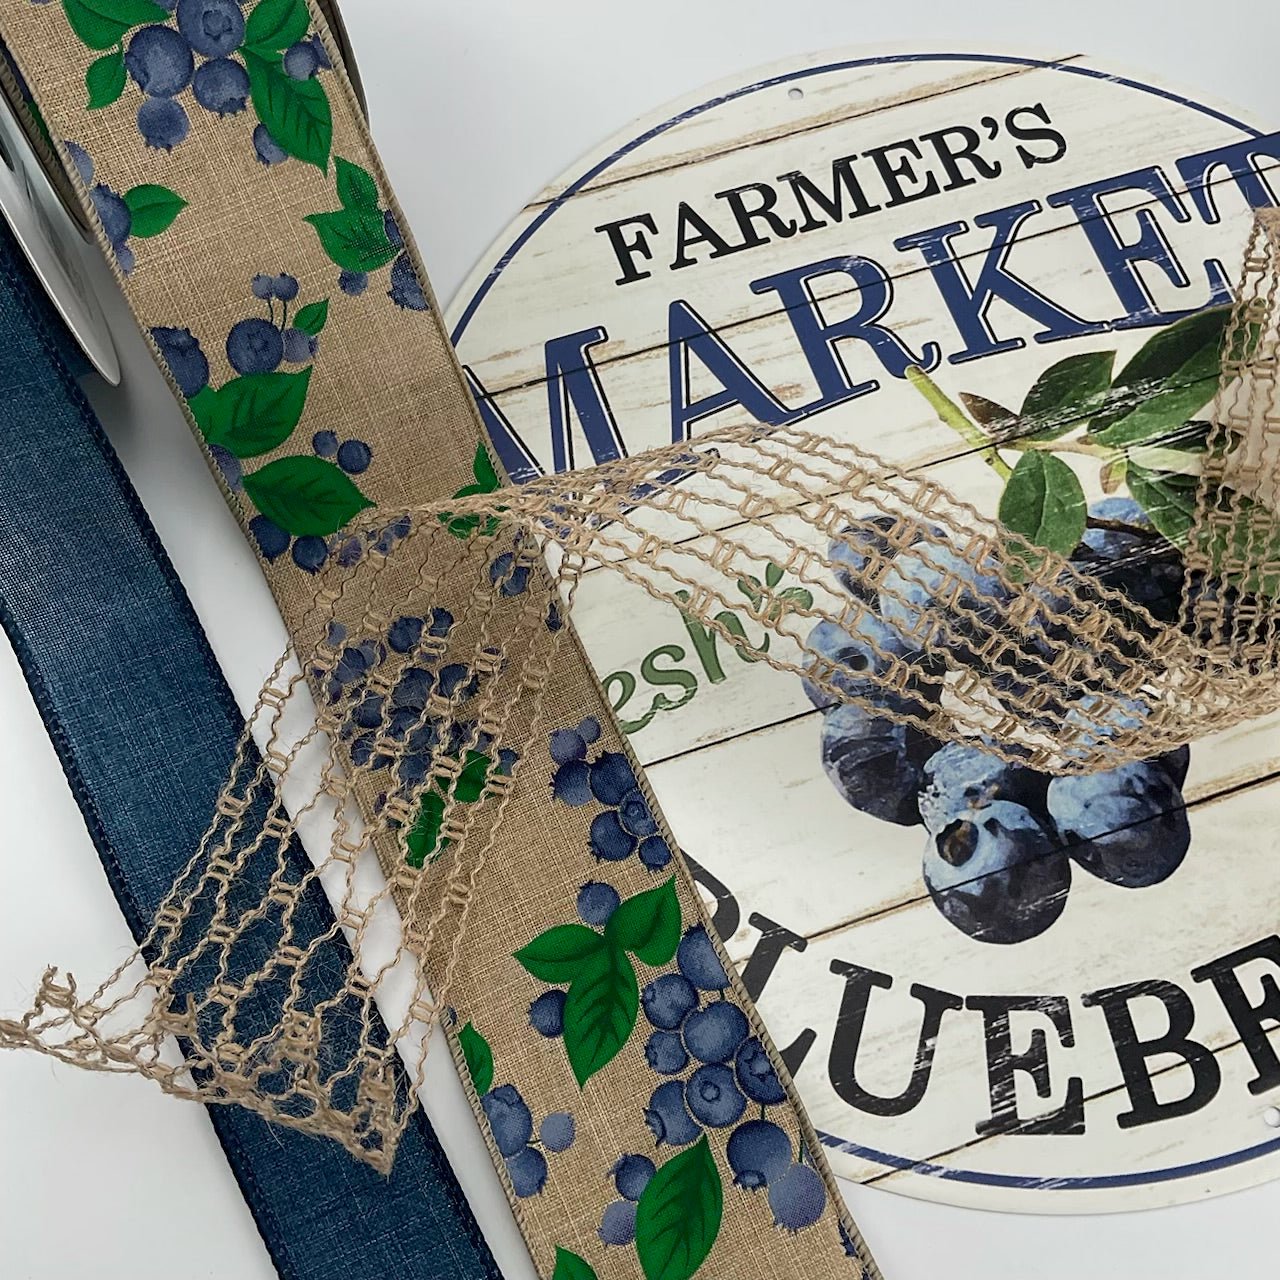 Blueberries metal market sign and ribbon bundle - Greenery Marketsigns for wreathsMetalroundx4